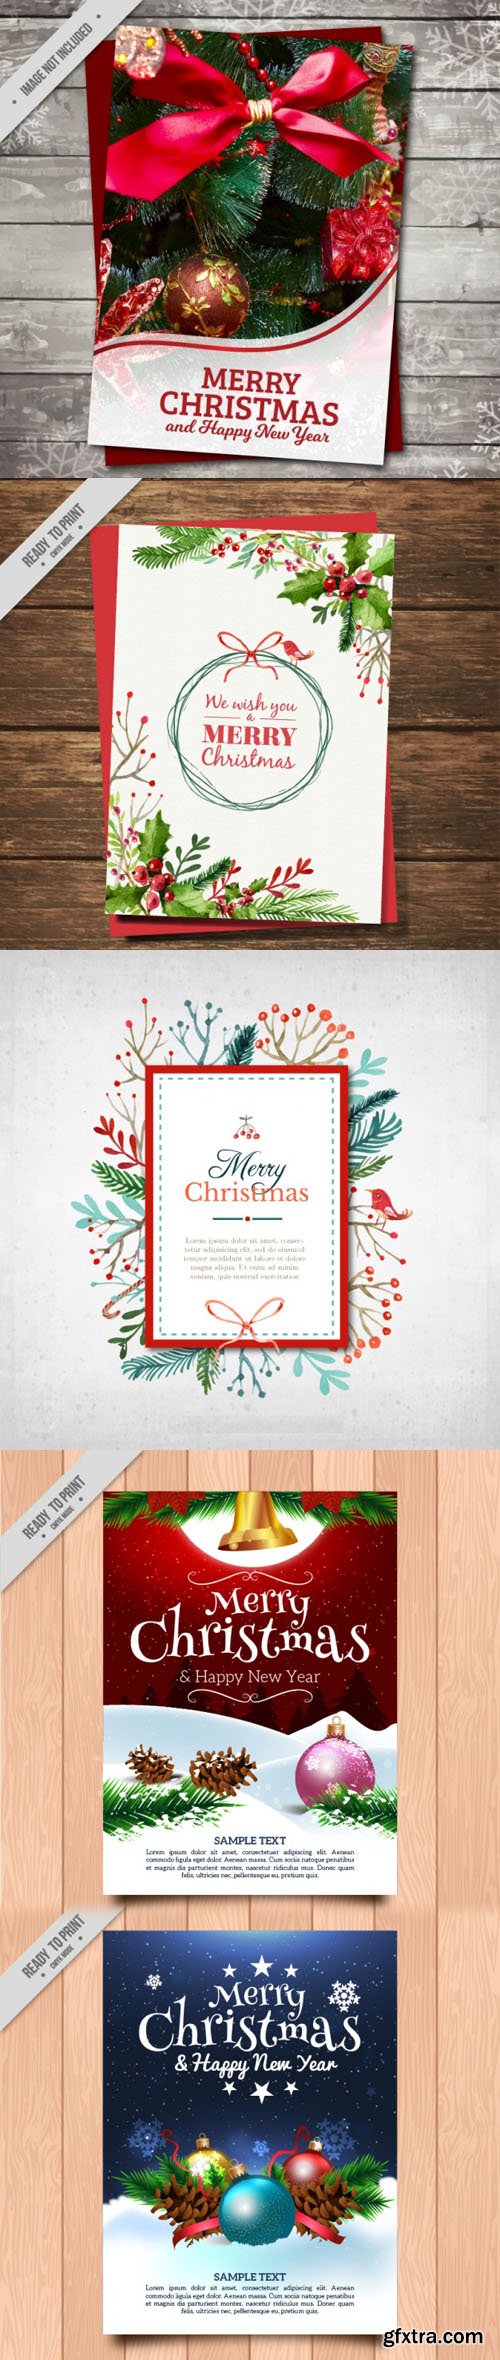 Christmas & New Year Greeting Cards Vector in Realistic Styles